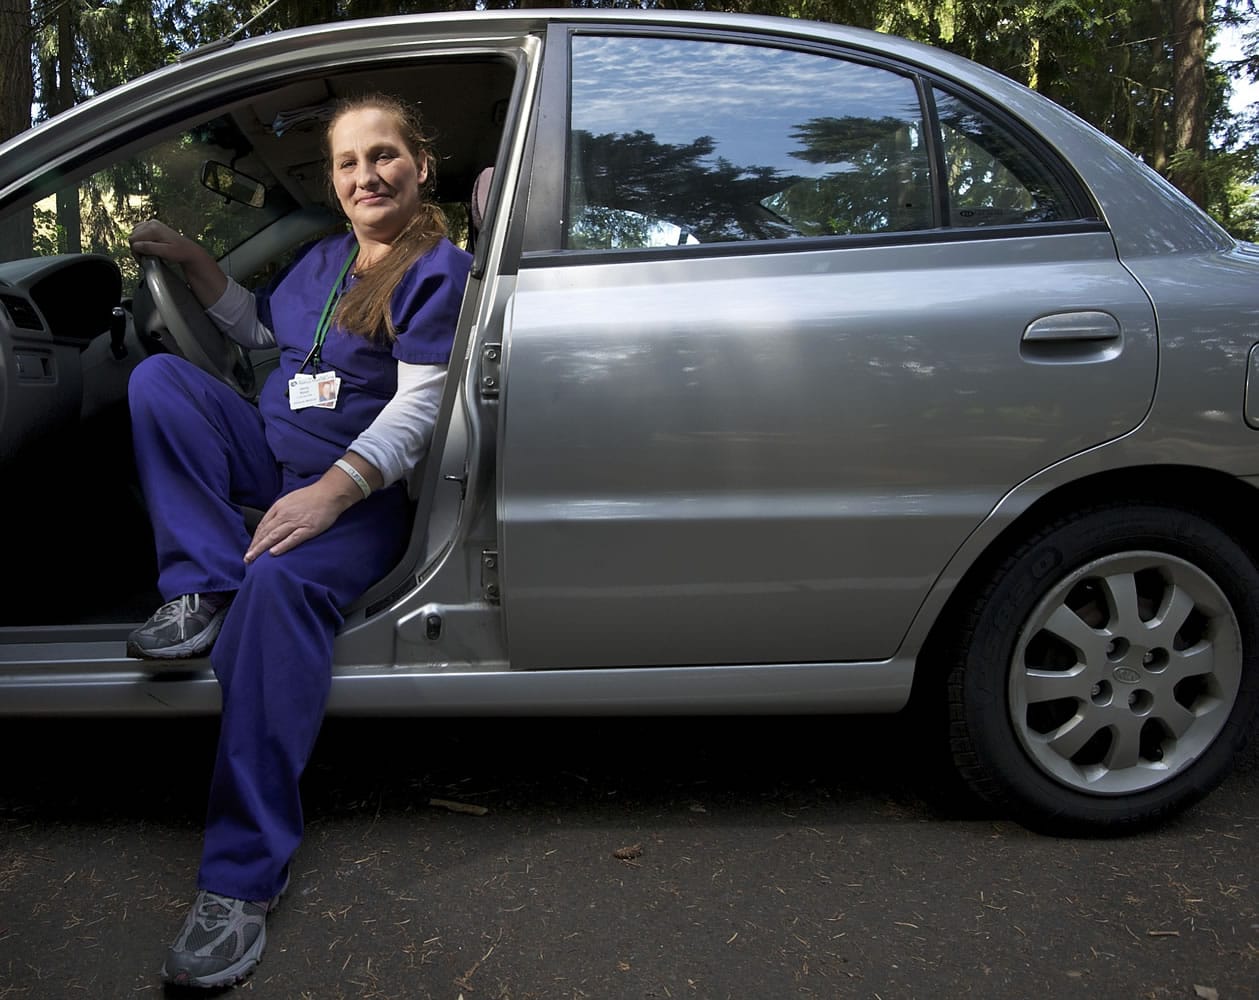 Jenny Rund, an itinerant Certified Nursing Assistant and personal caregiver, shows off her shiny new-to-her Kia Rio.